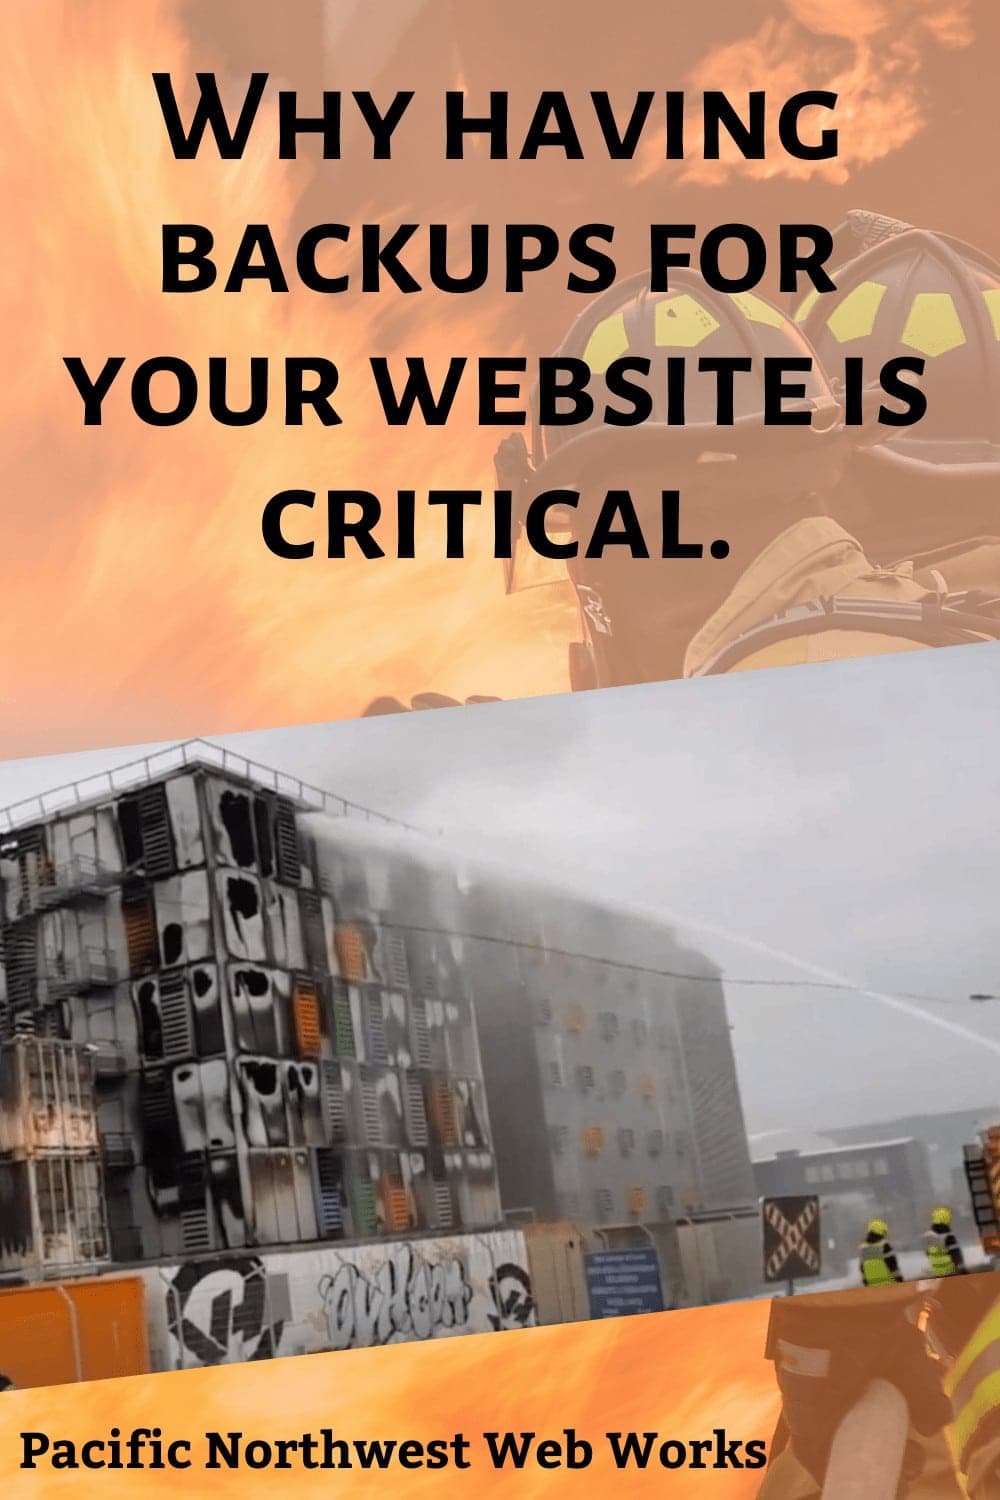 Why having backups for your website is critical